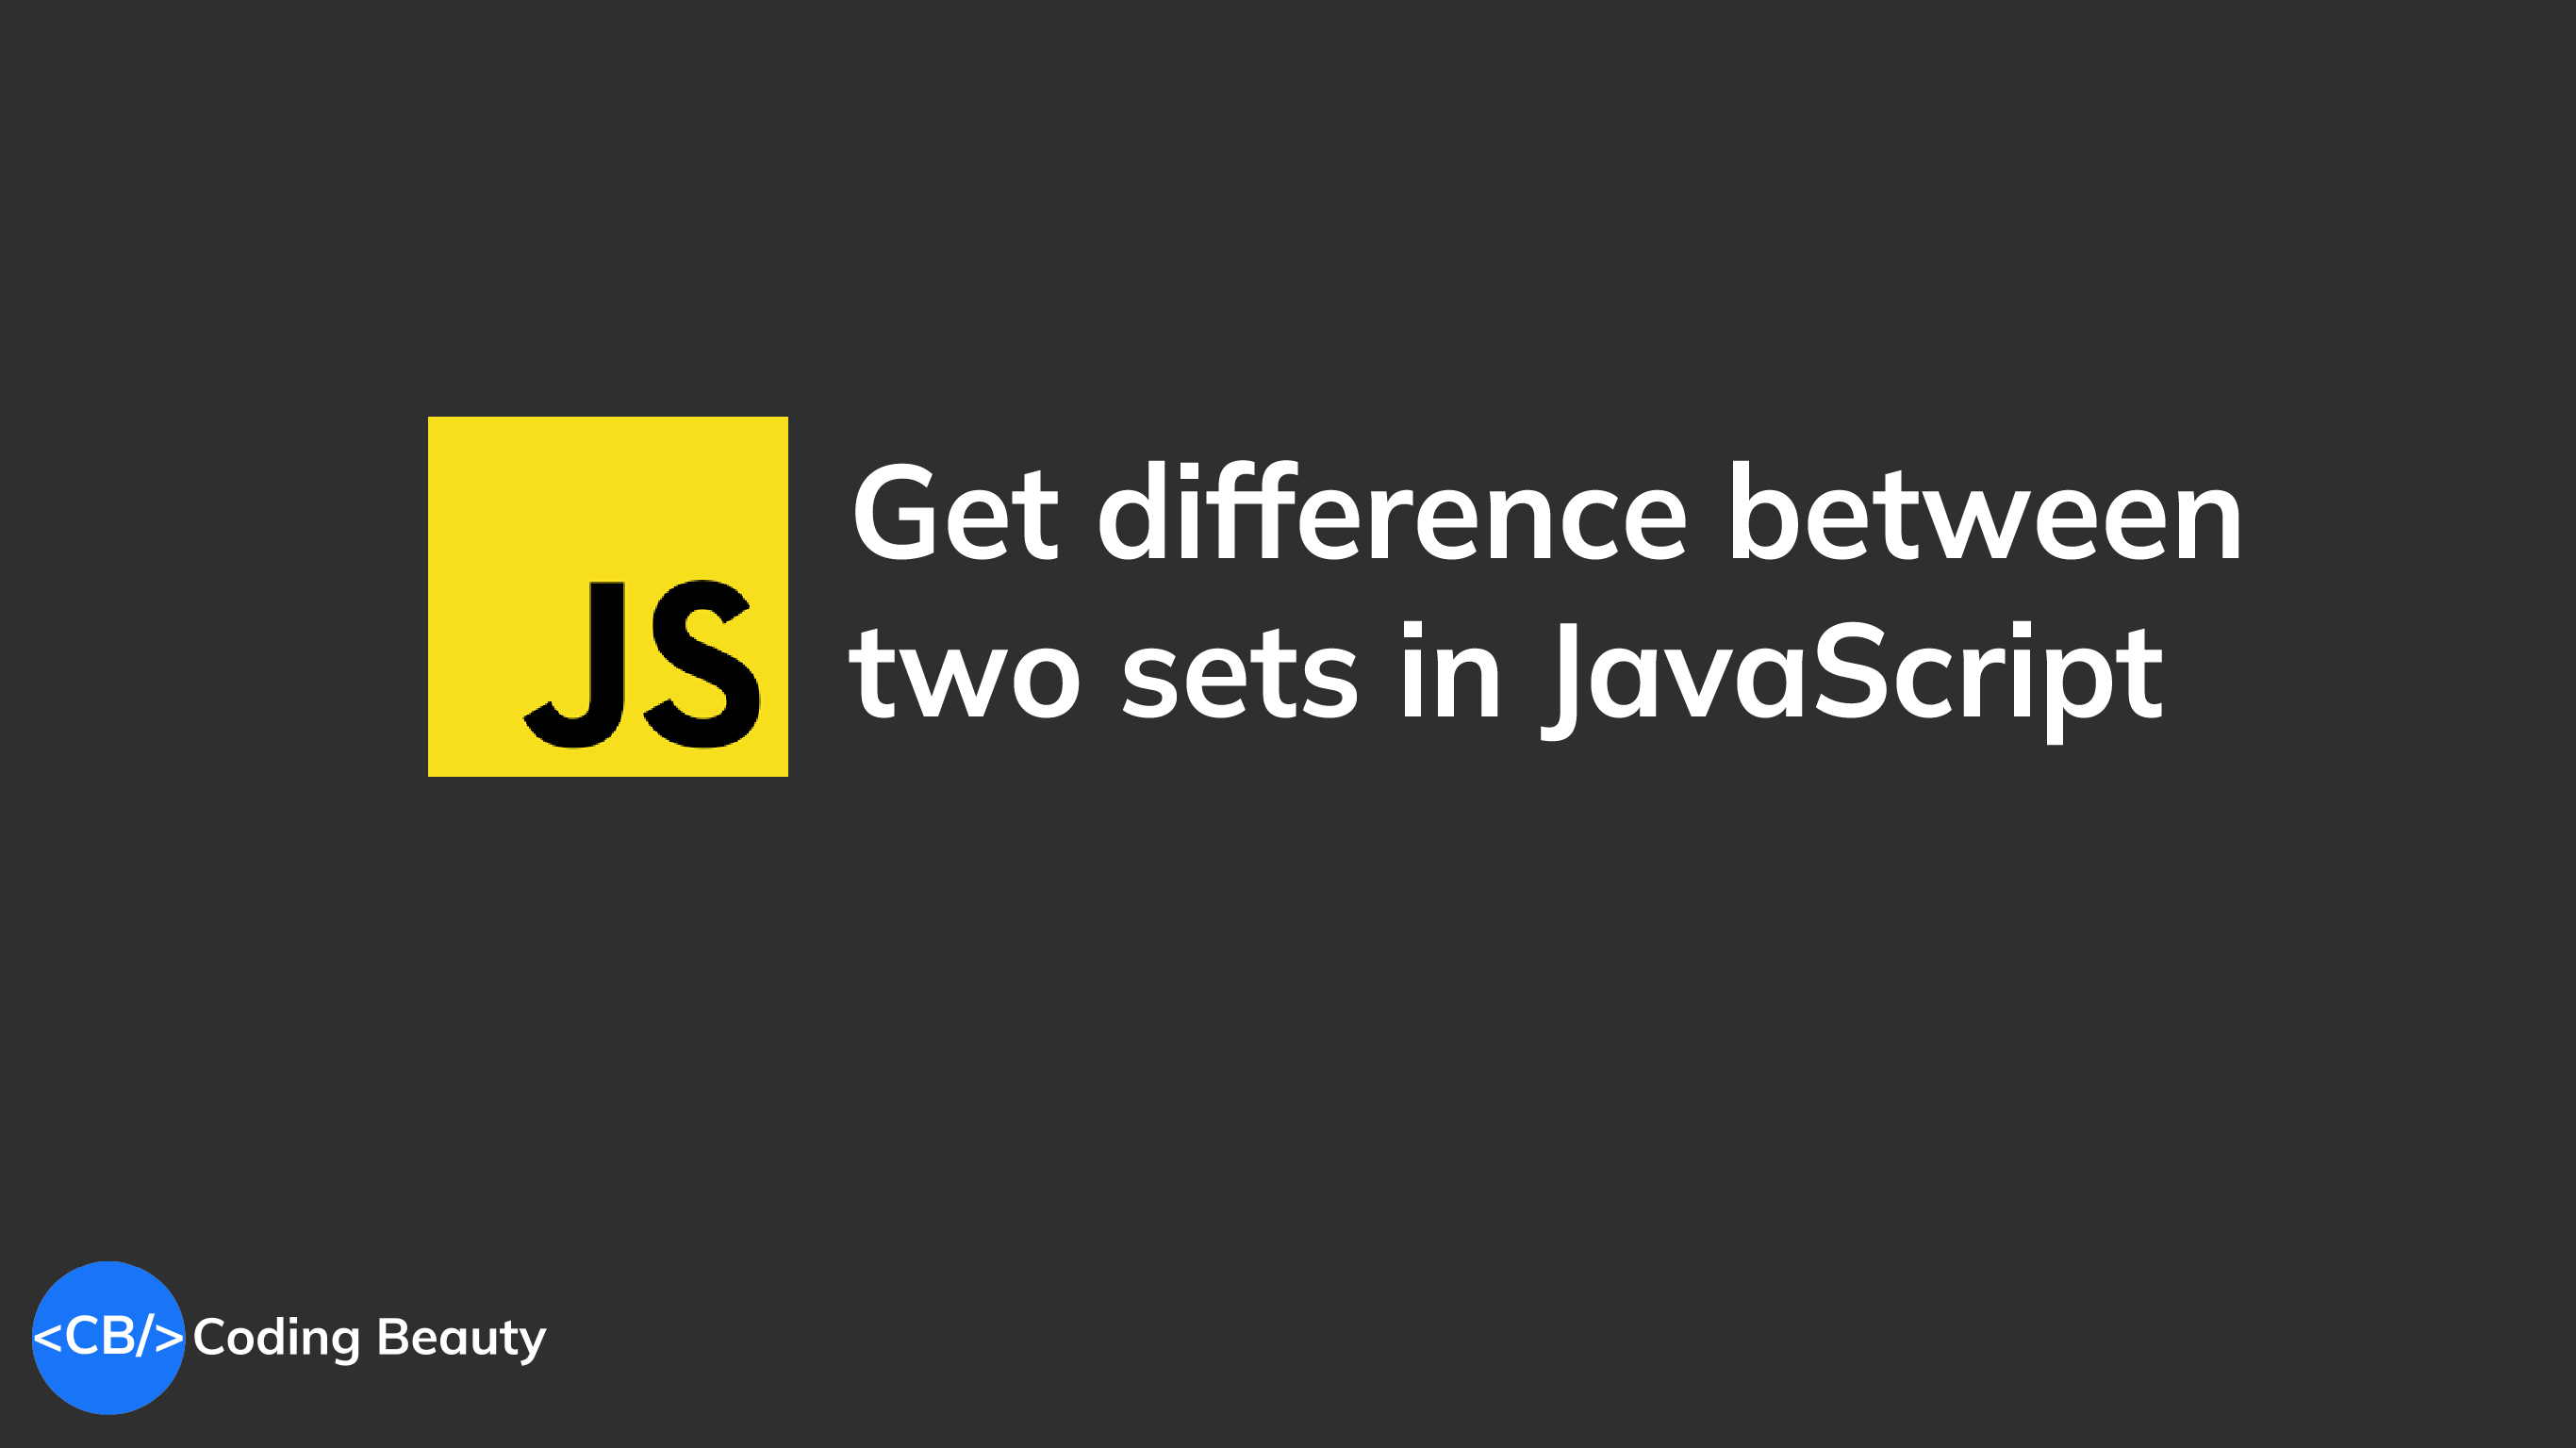 How to get the difference between two sets in JavaScript